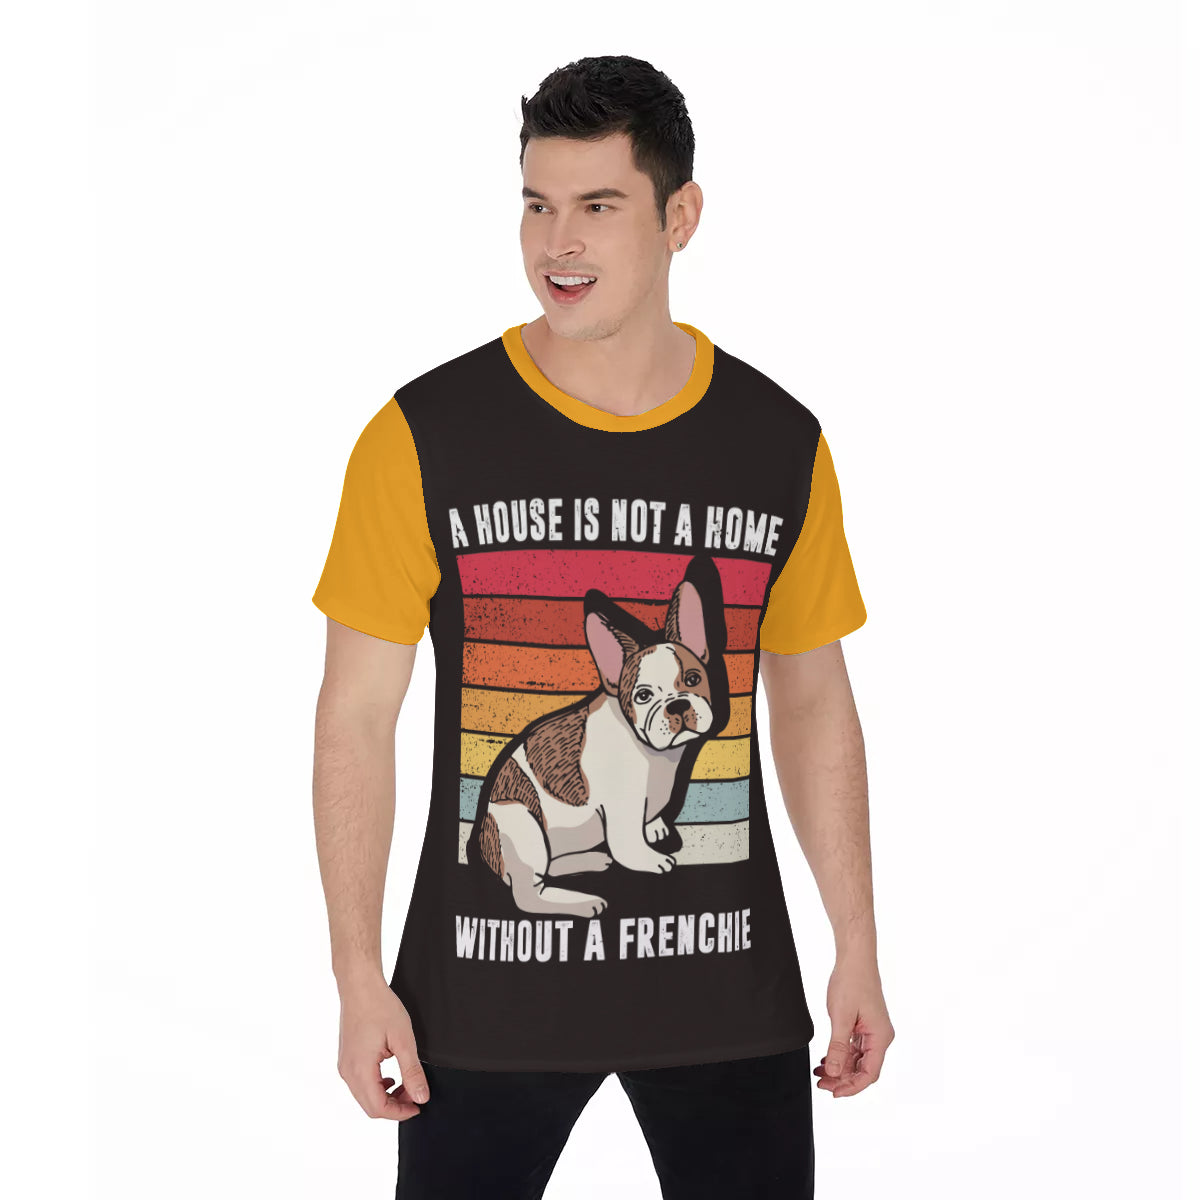 A house without a Frenchie - Men's O-Neck T-Shirt - Frenchie Bulldog Shop